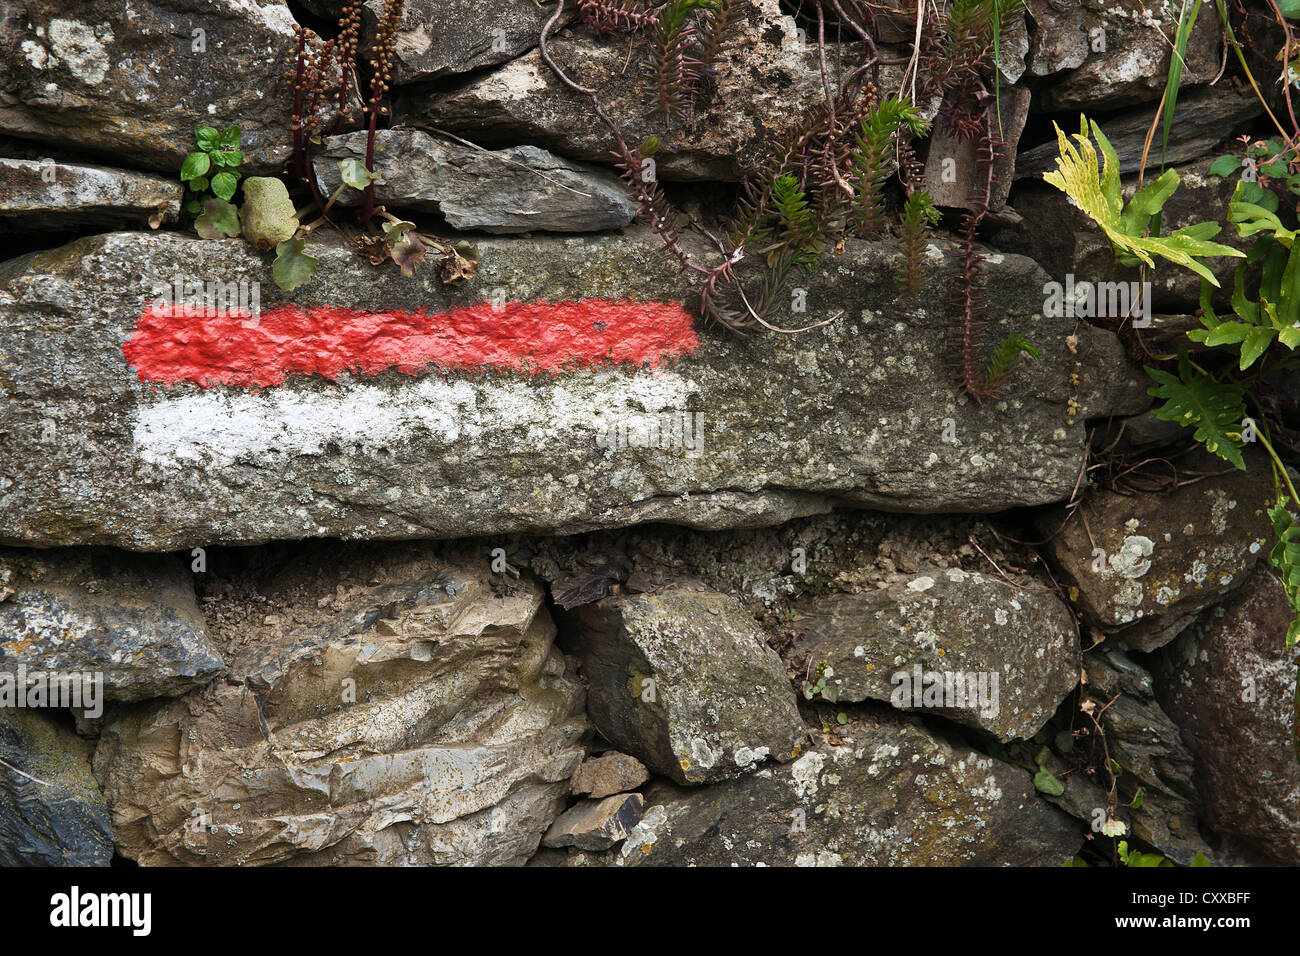 Red and white flash markings that guide walkers in Europe. Stock Photo